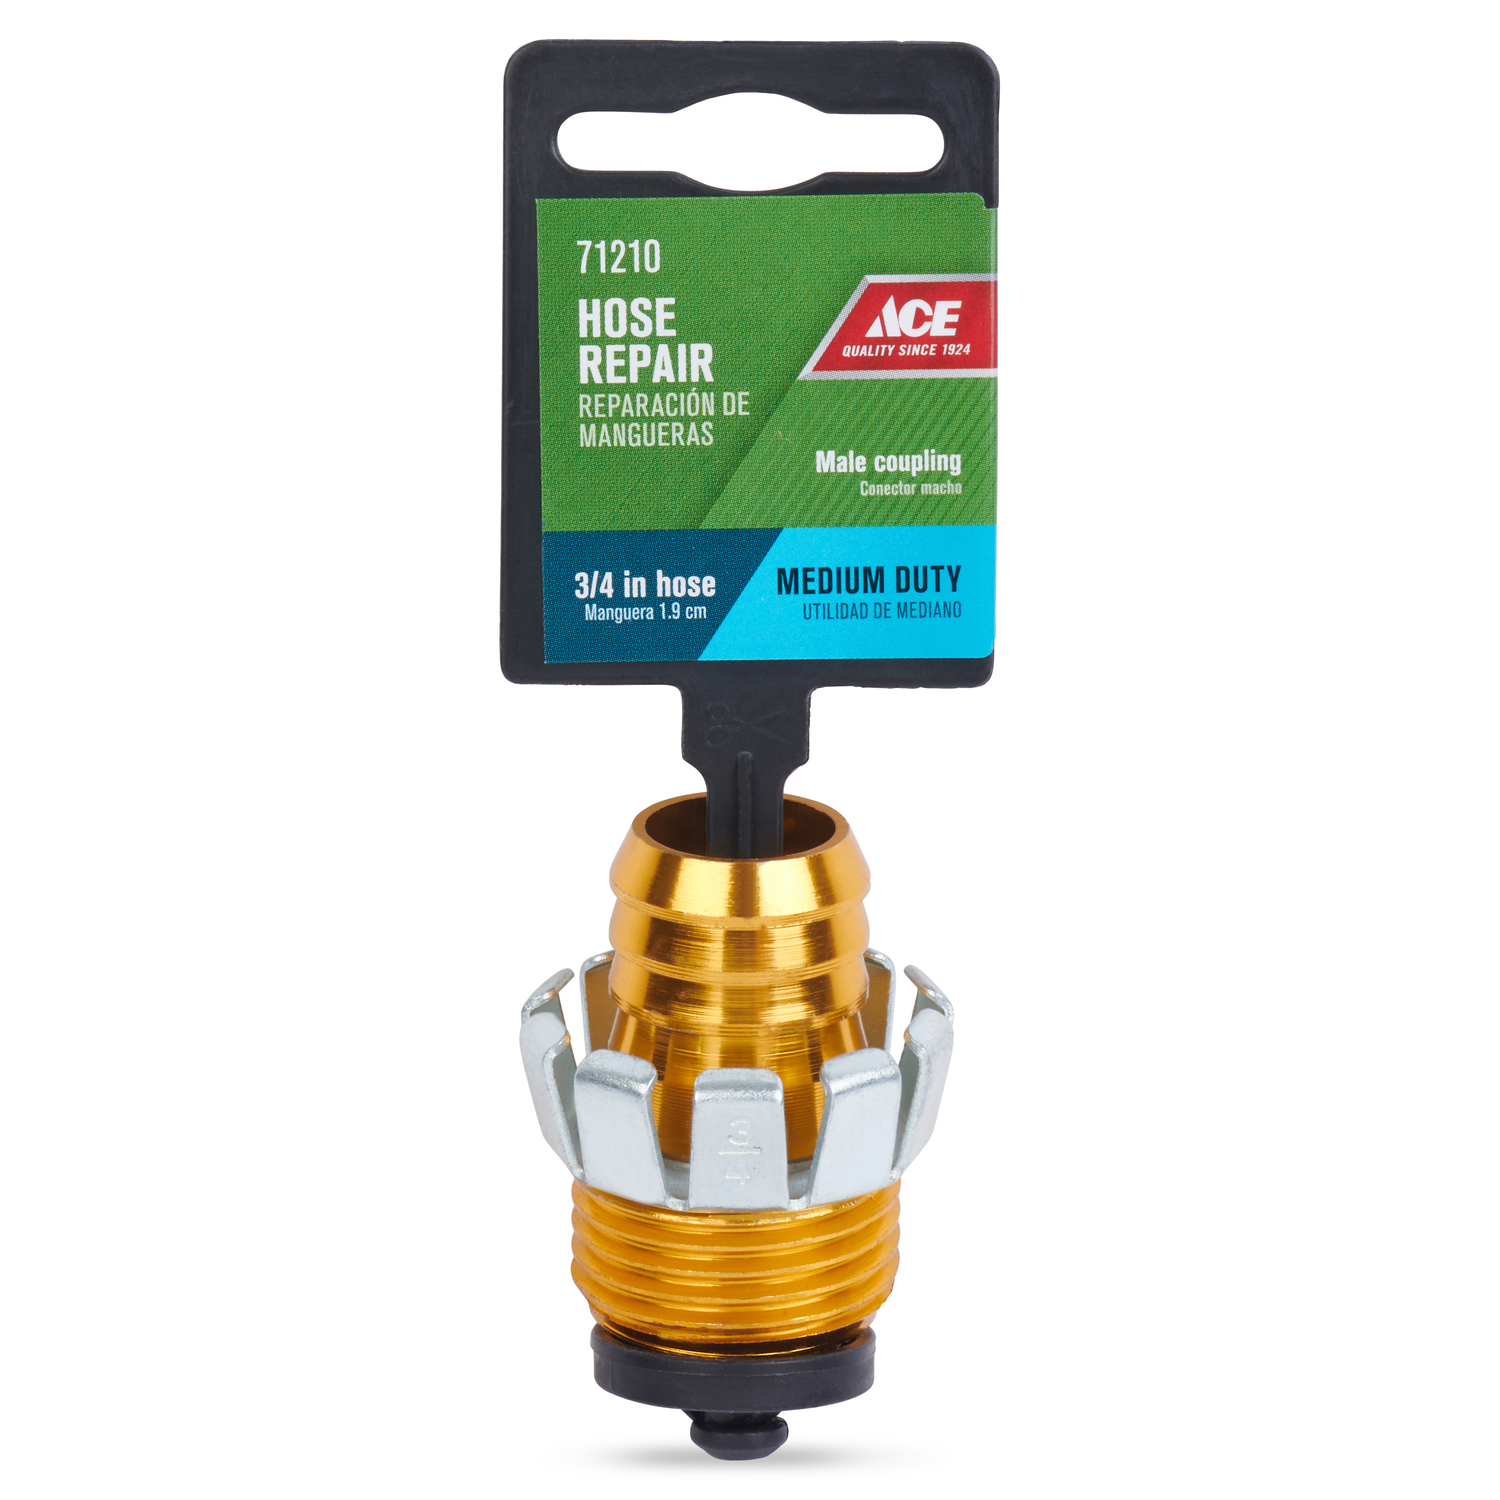 Ace 3/4 in. Metal Male Clinch Hose Mender Clamp